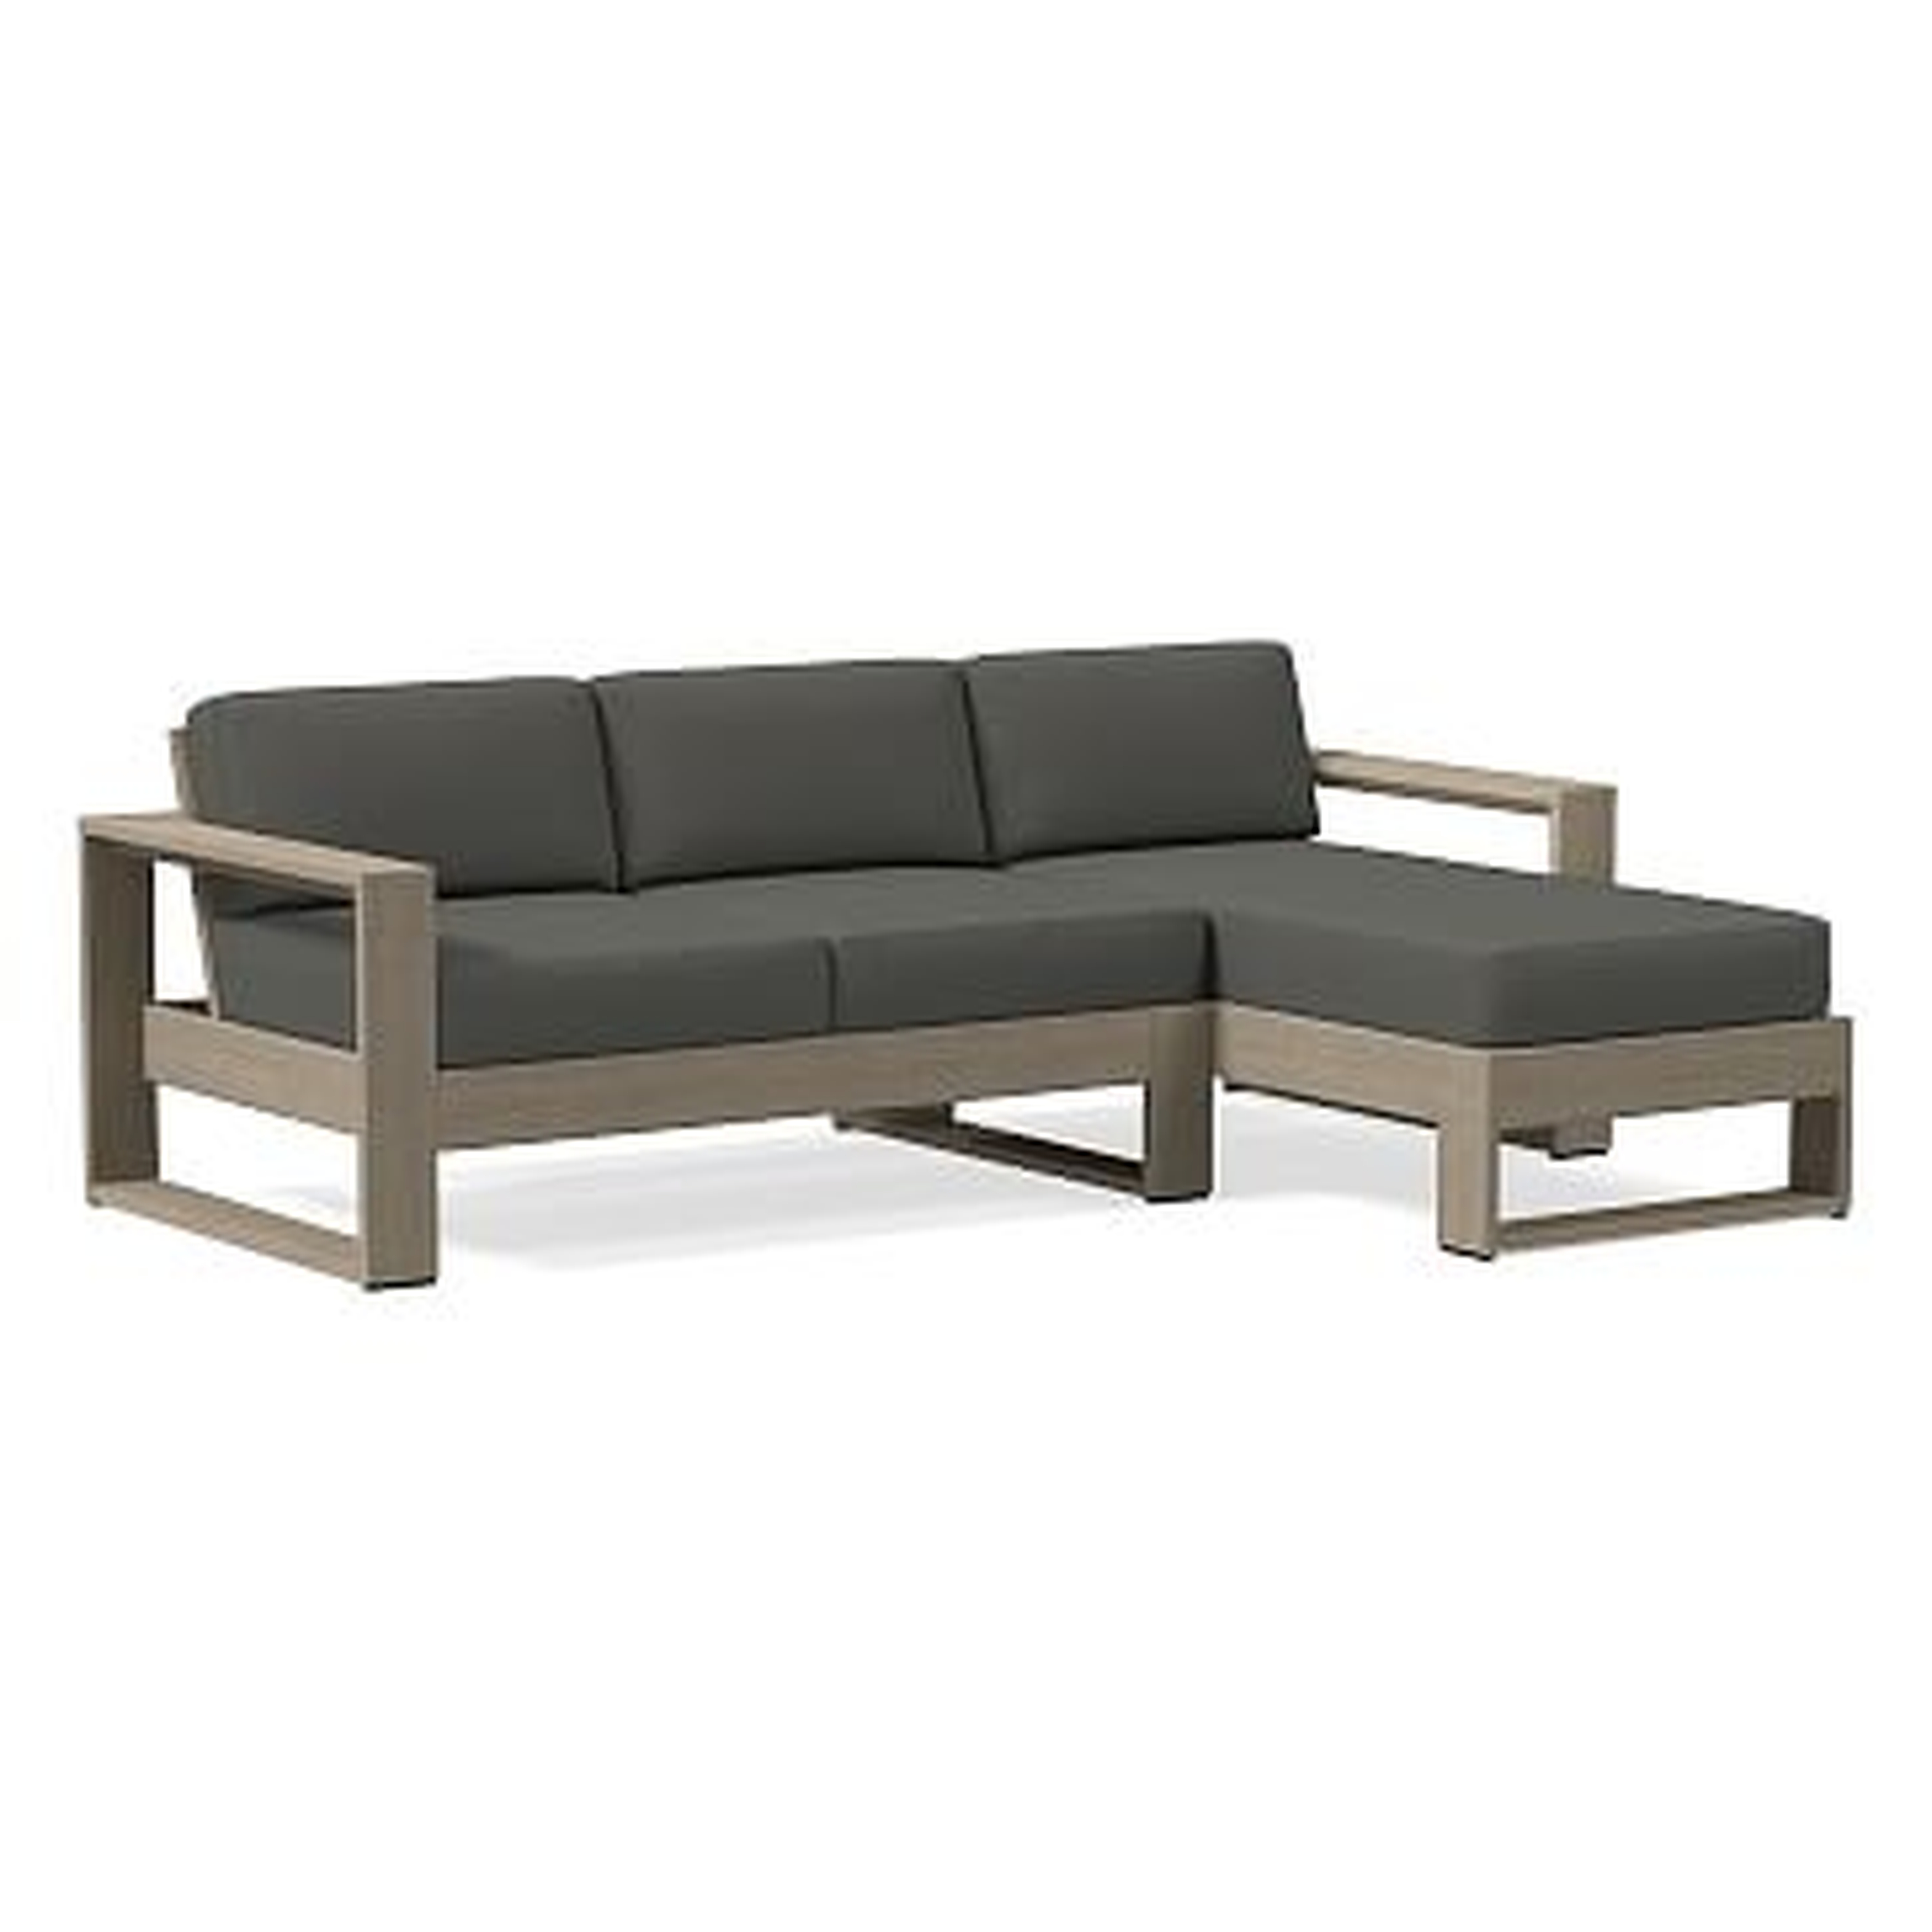 Portside Collection 2 Piece Sectional, Sectional, Chaise + Sectional, Sofa, Slipcover, Cast Charcoal - West Elm